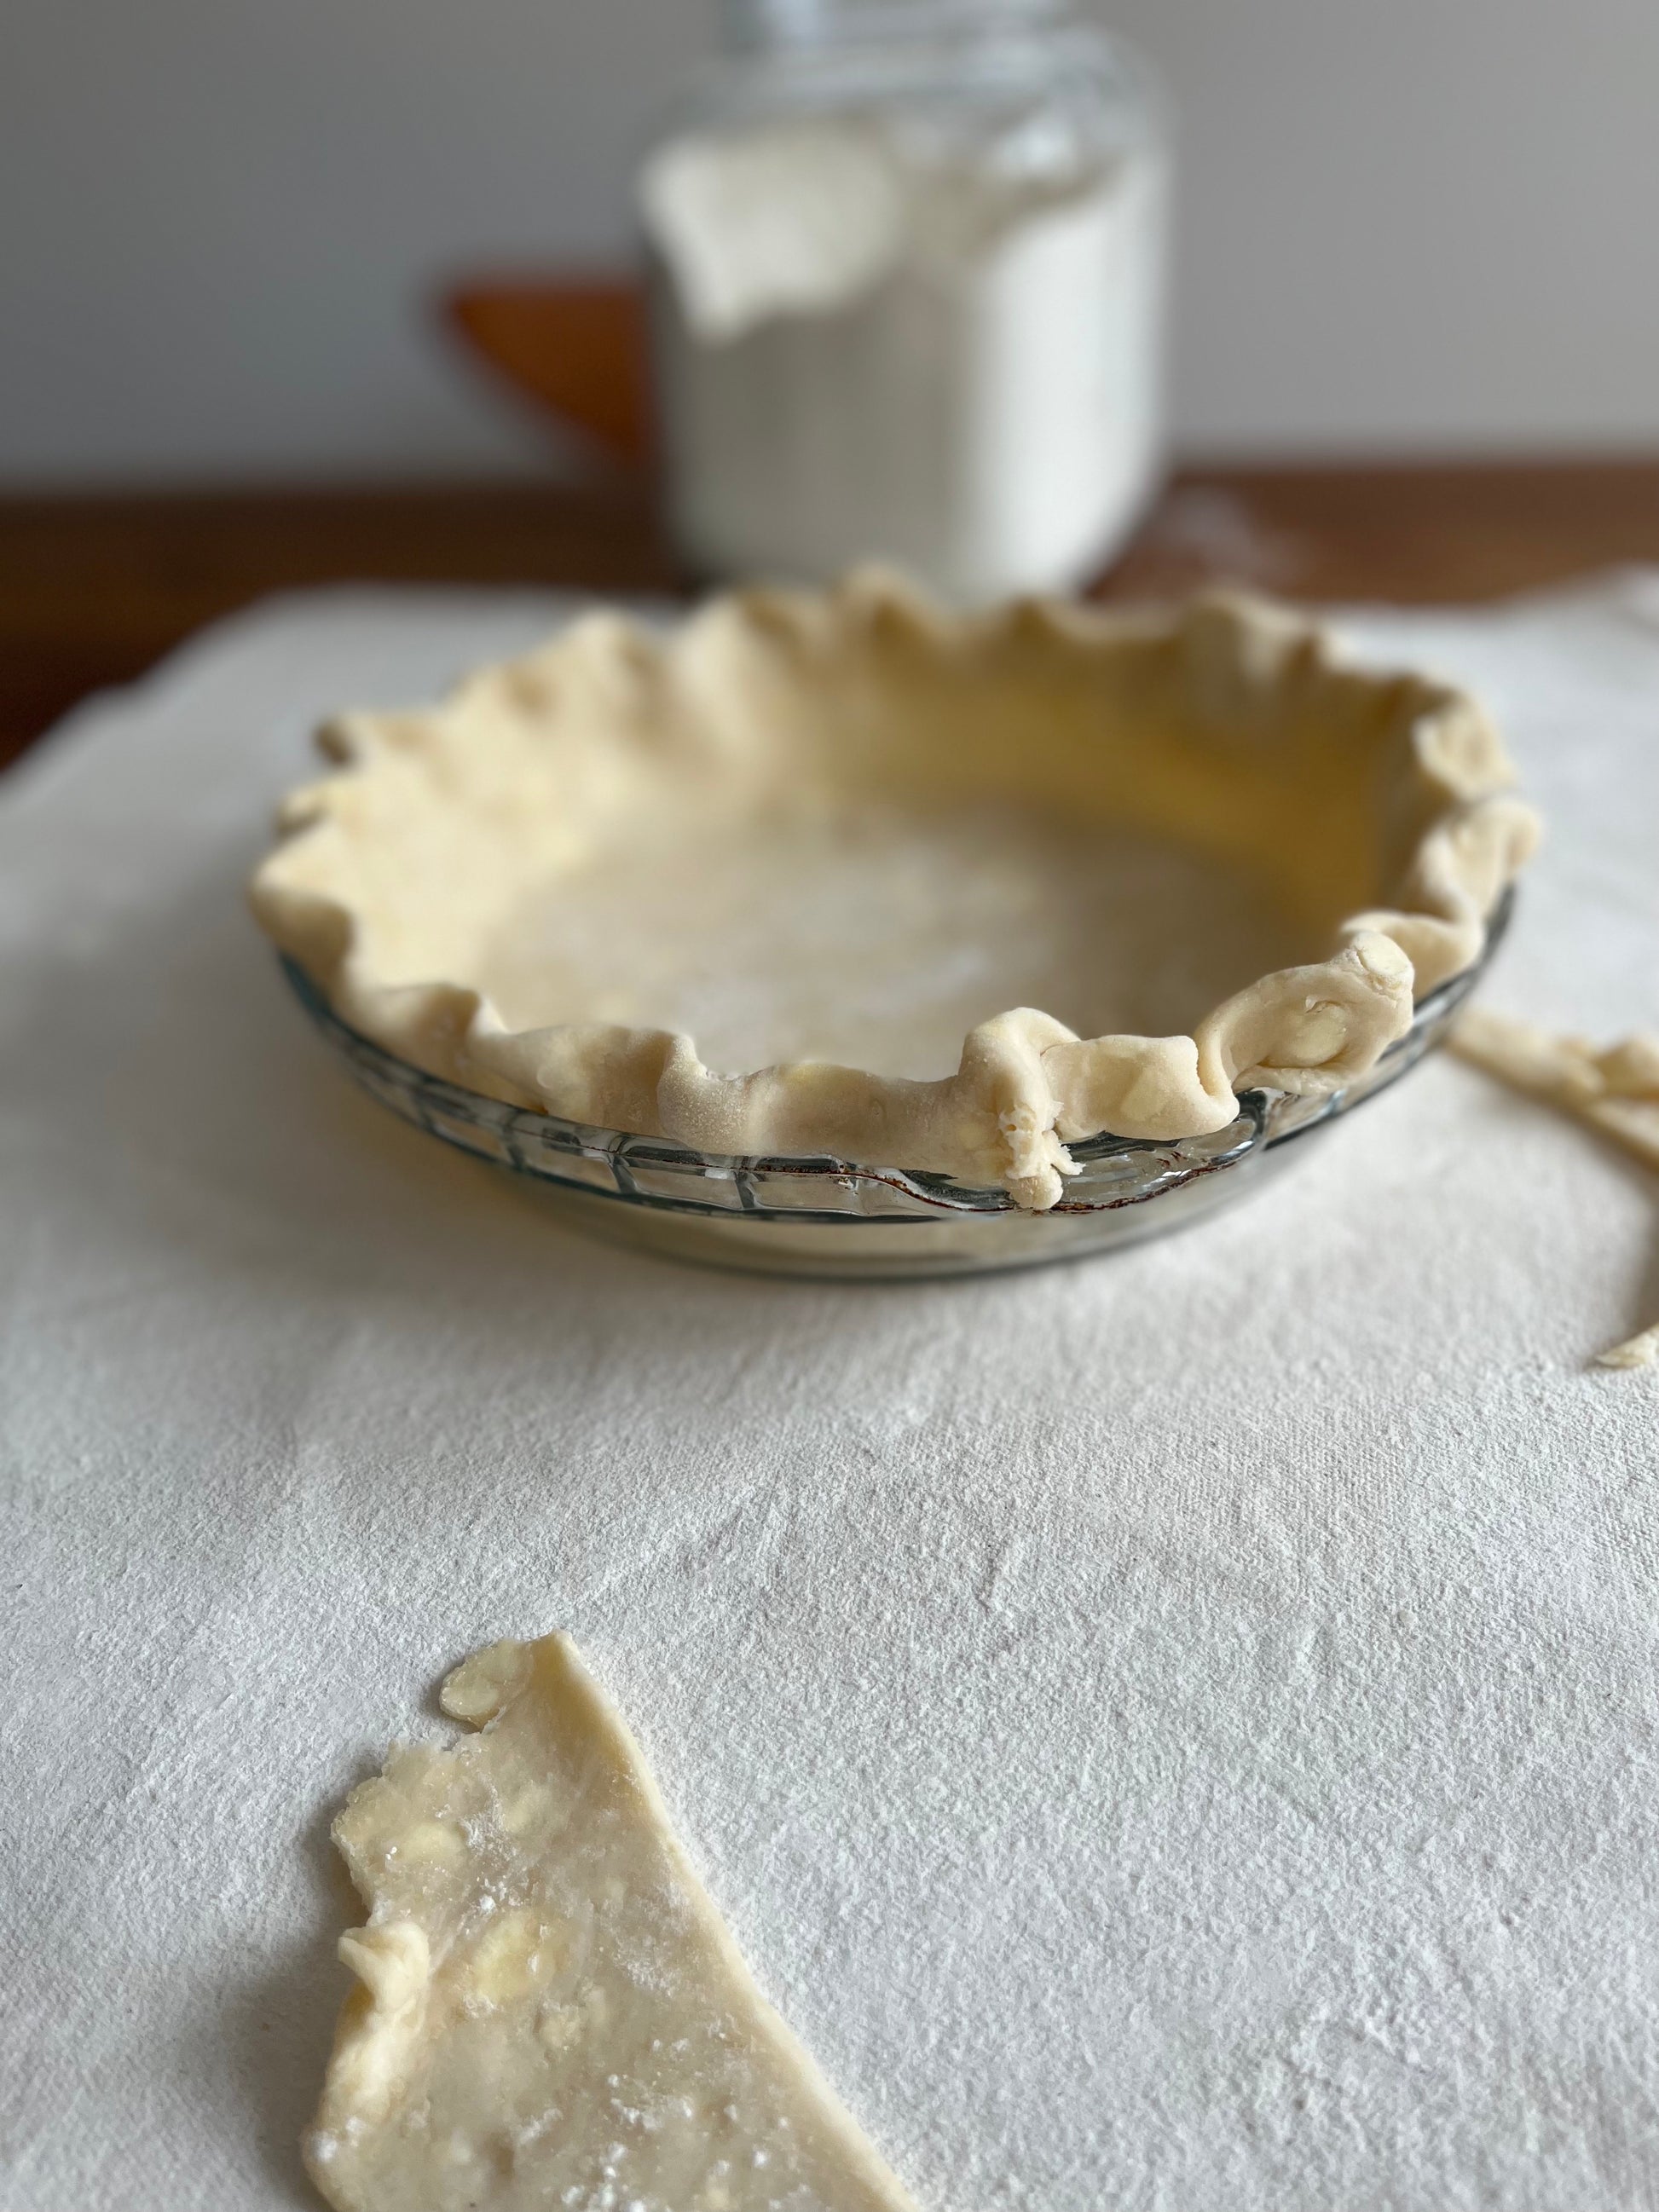 A crimped pie crust in a pie plaste sits atop a pastry cloth. A jar of flour is in the background.